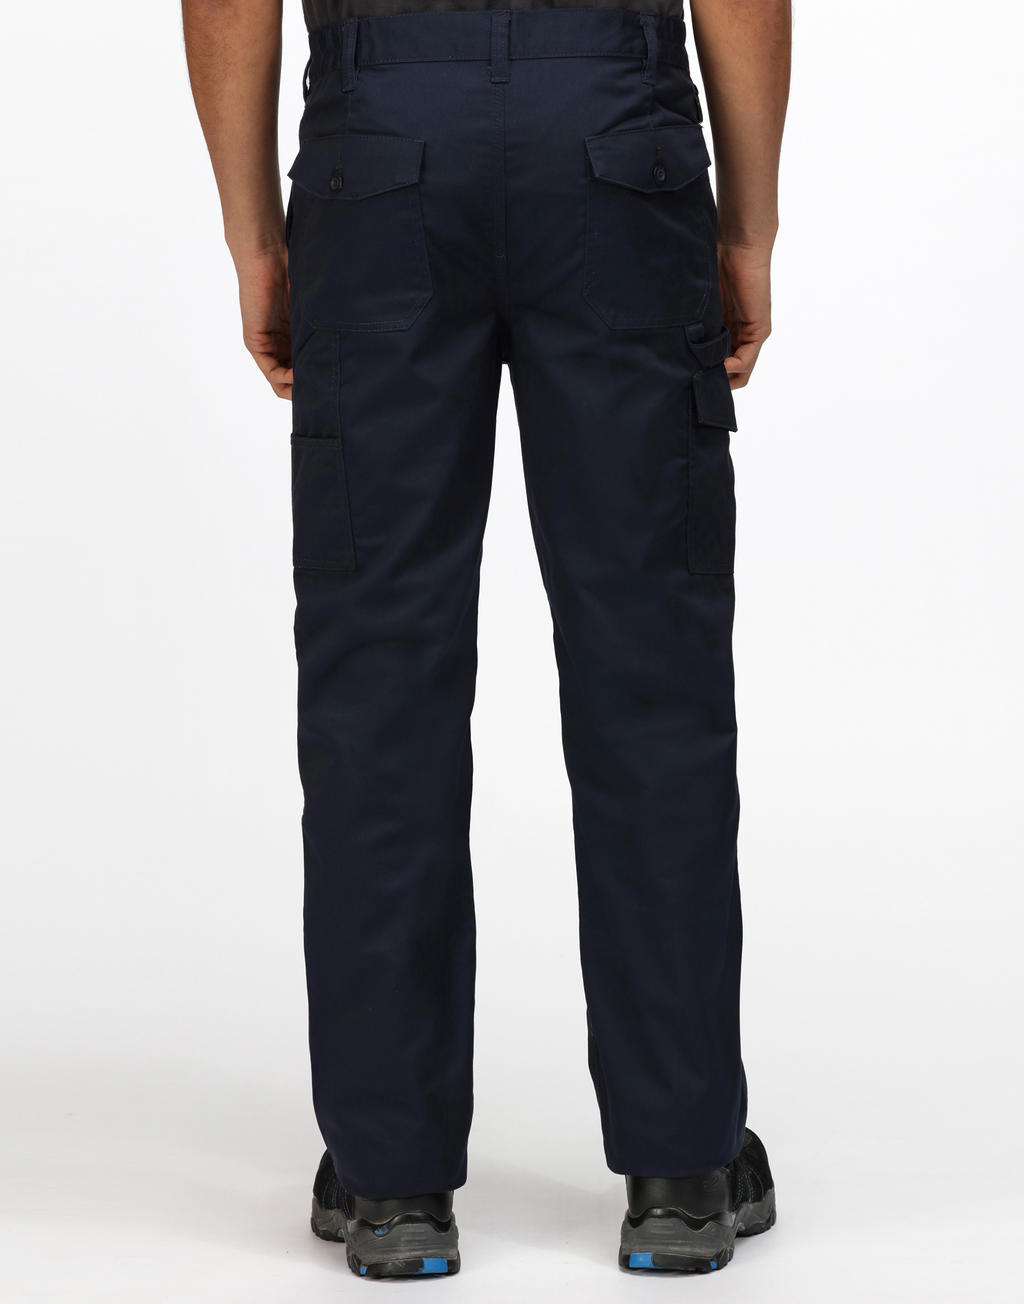  Pro Cargo Trousers (Short) in Farbe Black